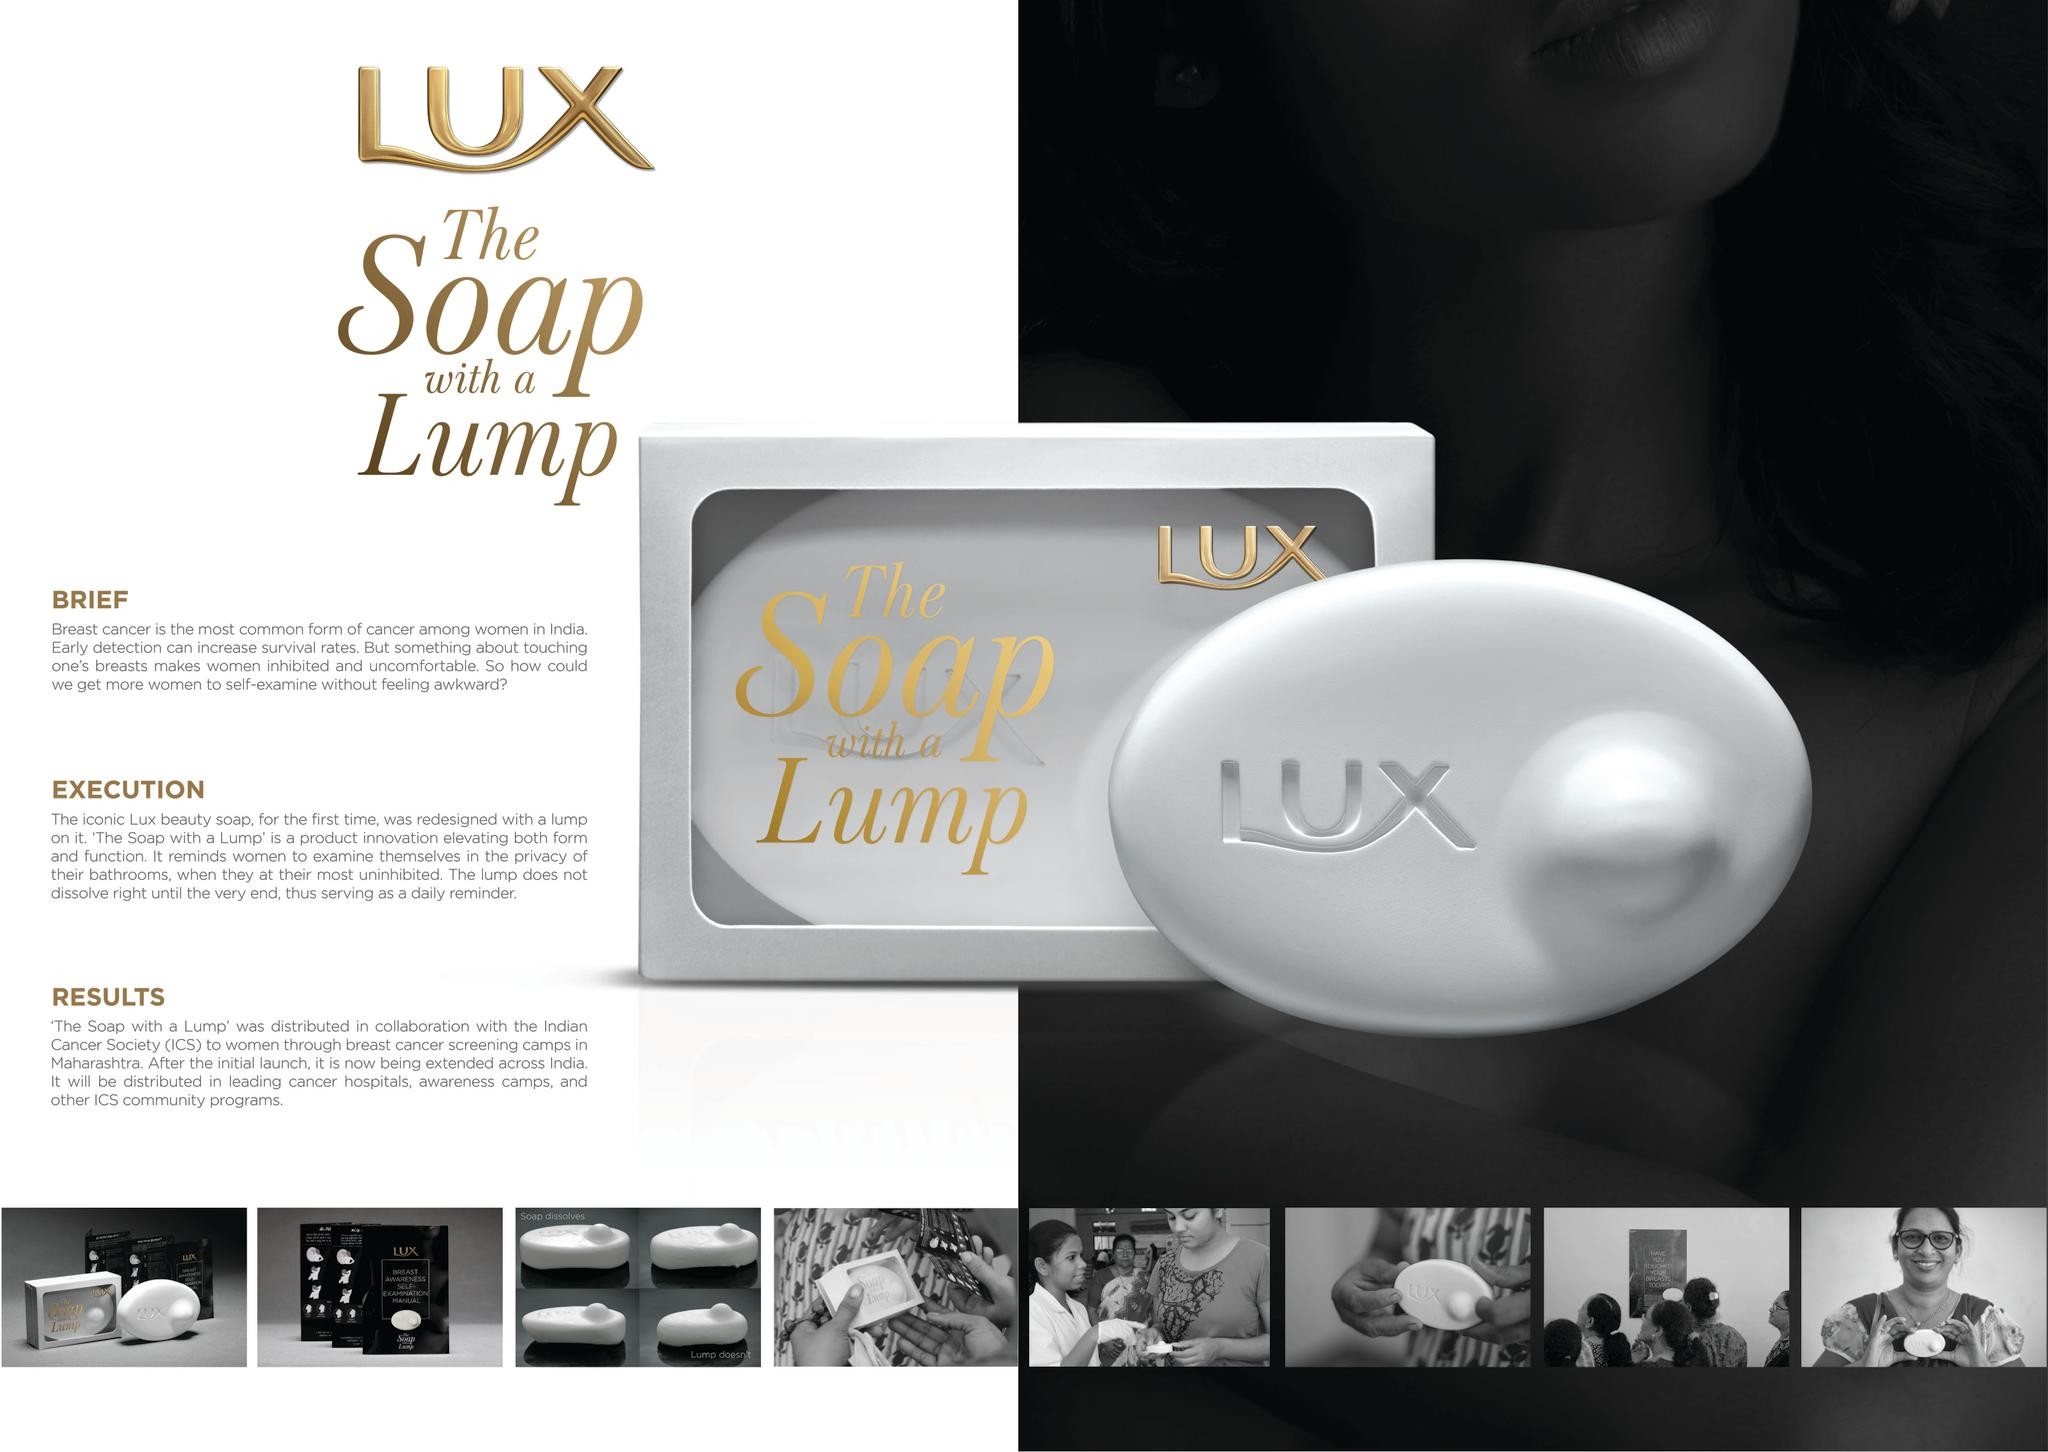 The Soap with a Lump